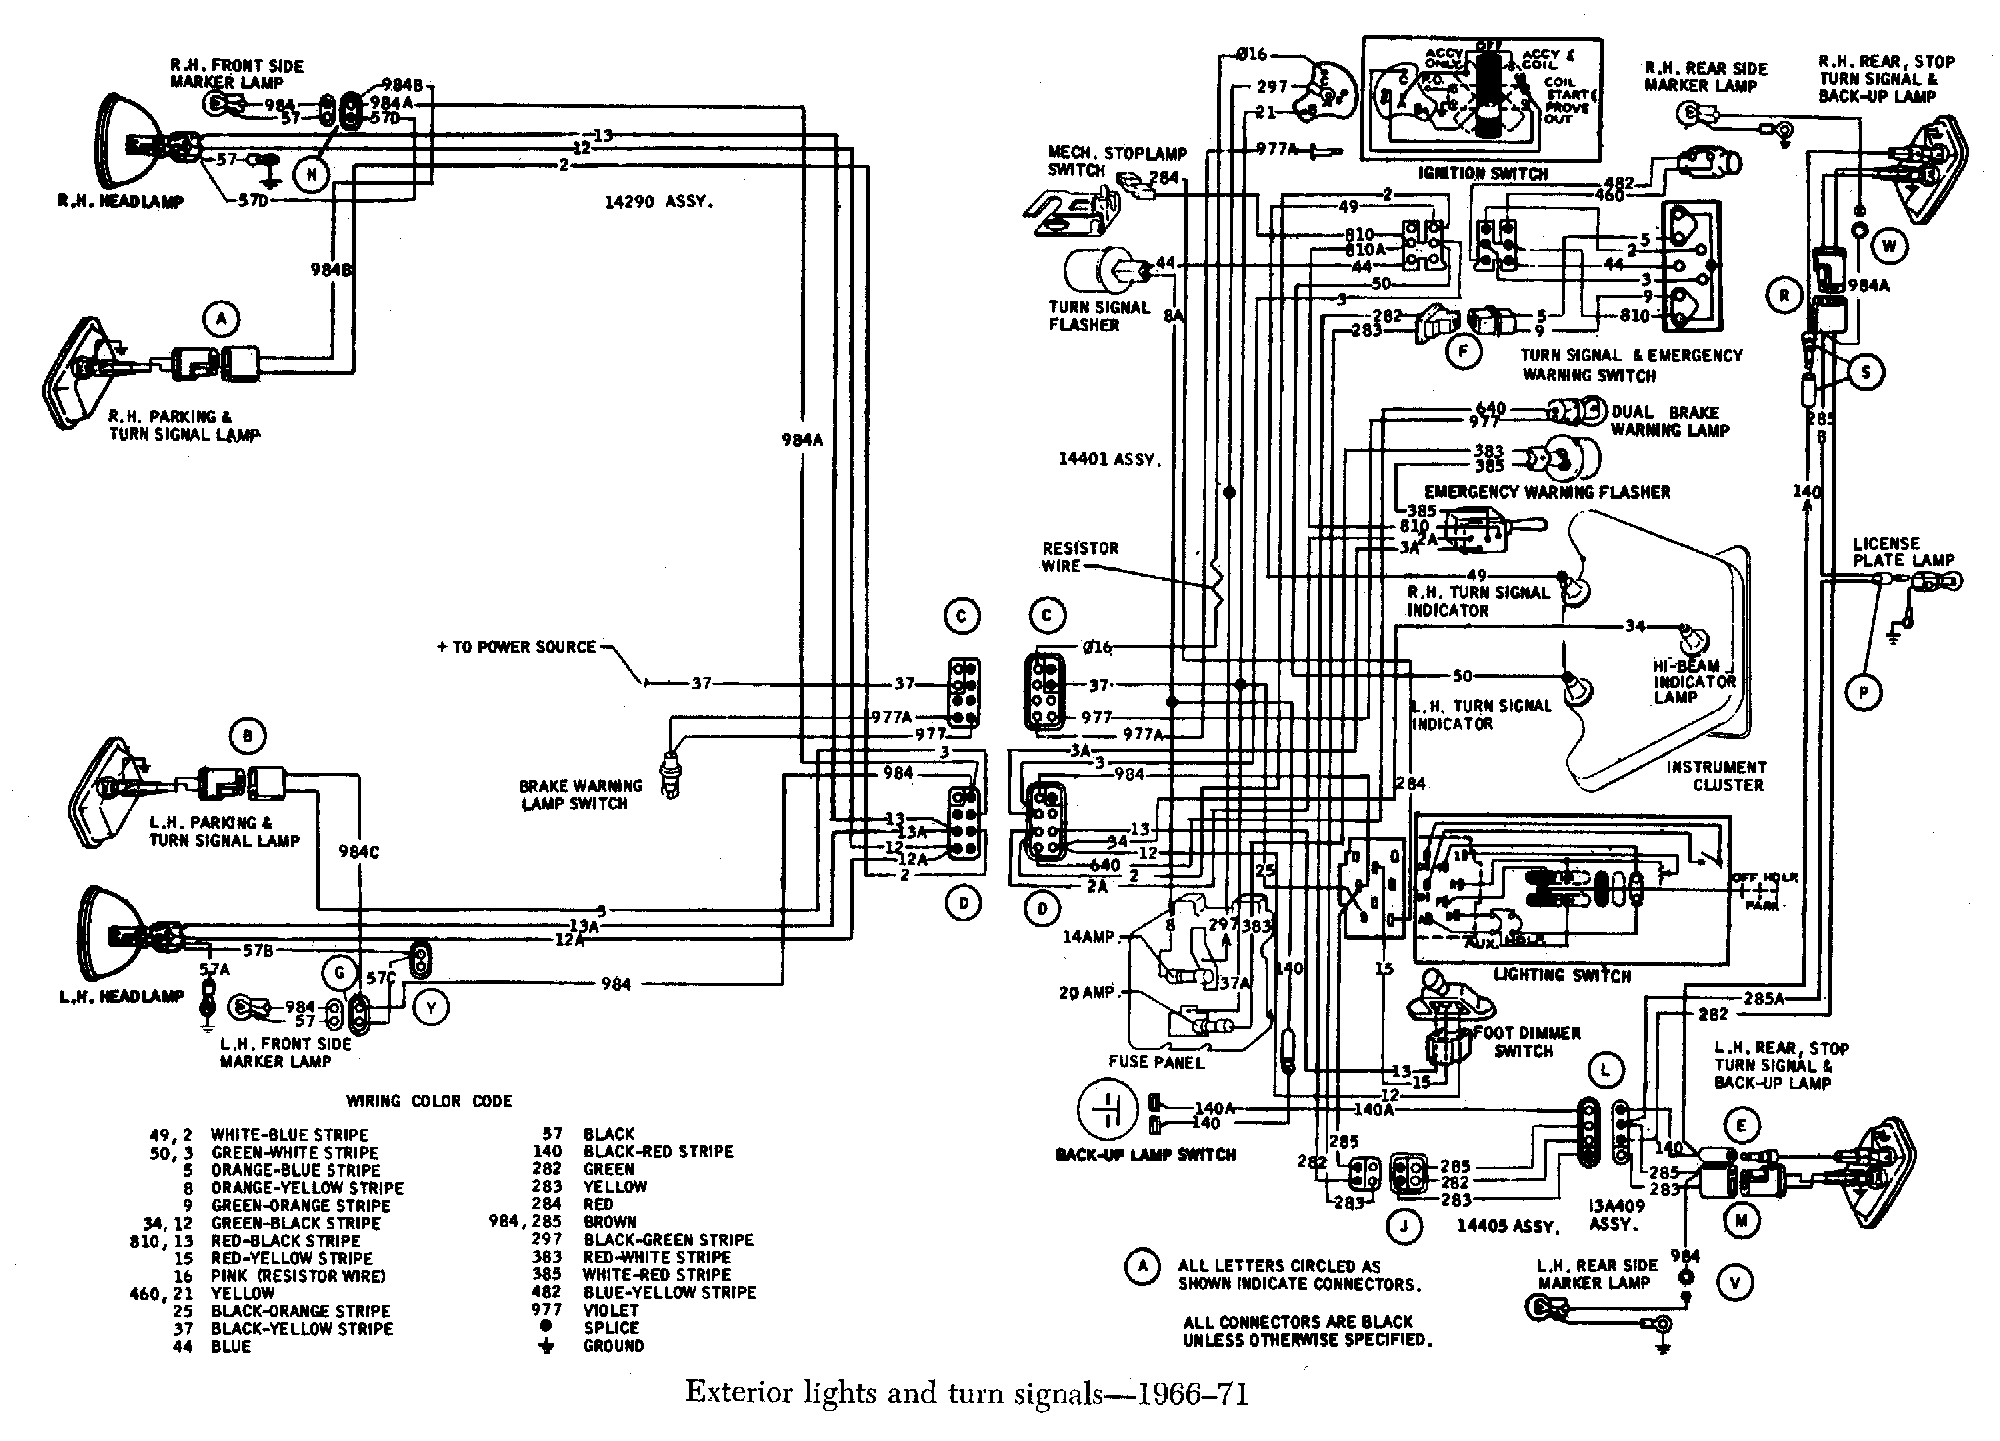 Bronco Technical Reference Wiring Diagrams Early Ford Bronco Wiring Diagrams 1966 1977 77 Ford Wiper Switch Wiring Diagram